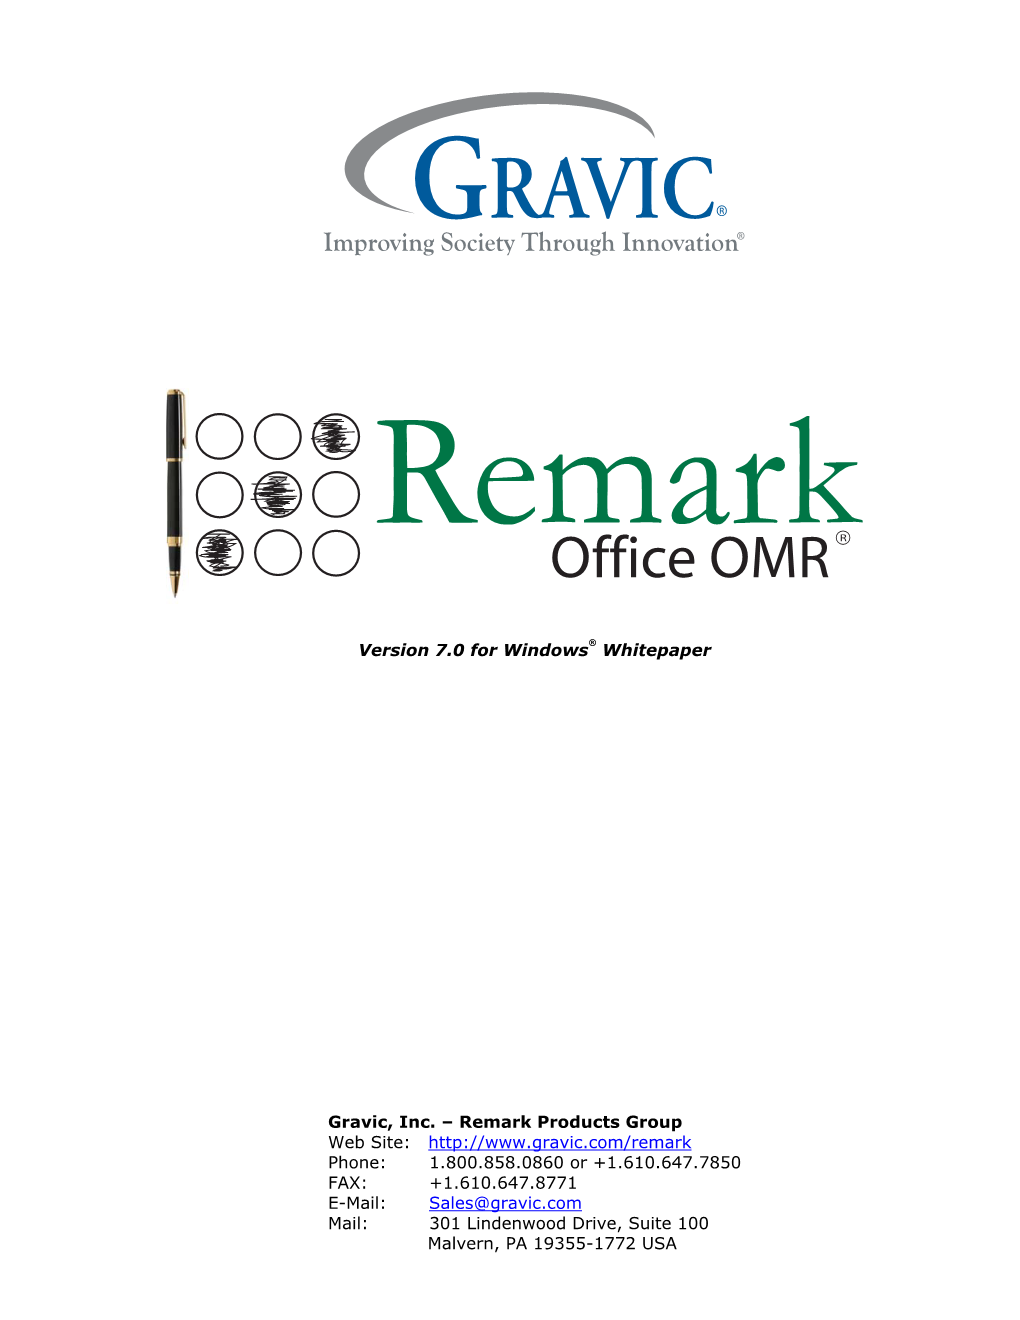 Product Summary for Remark Office OMR®